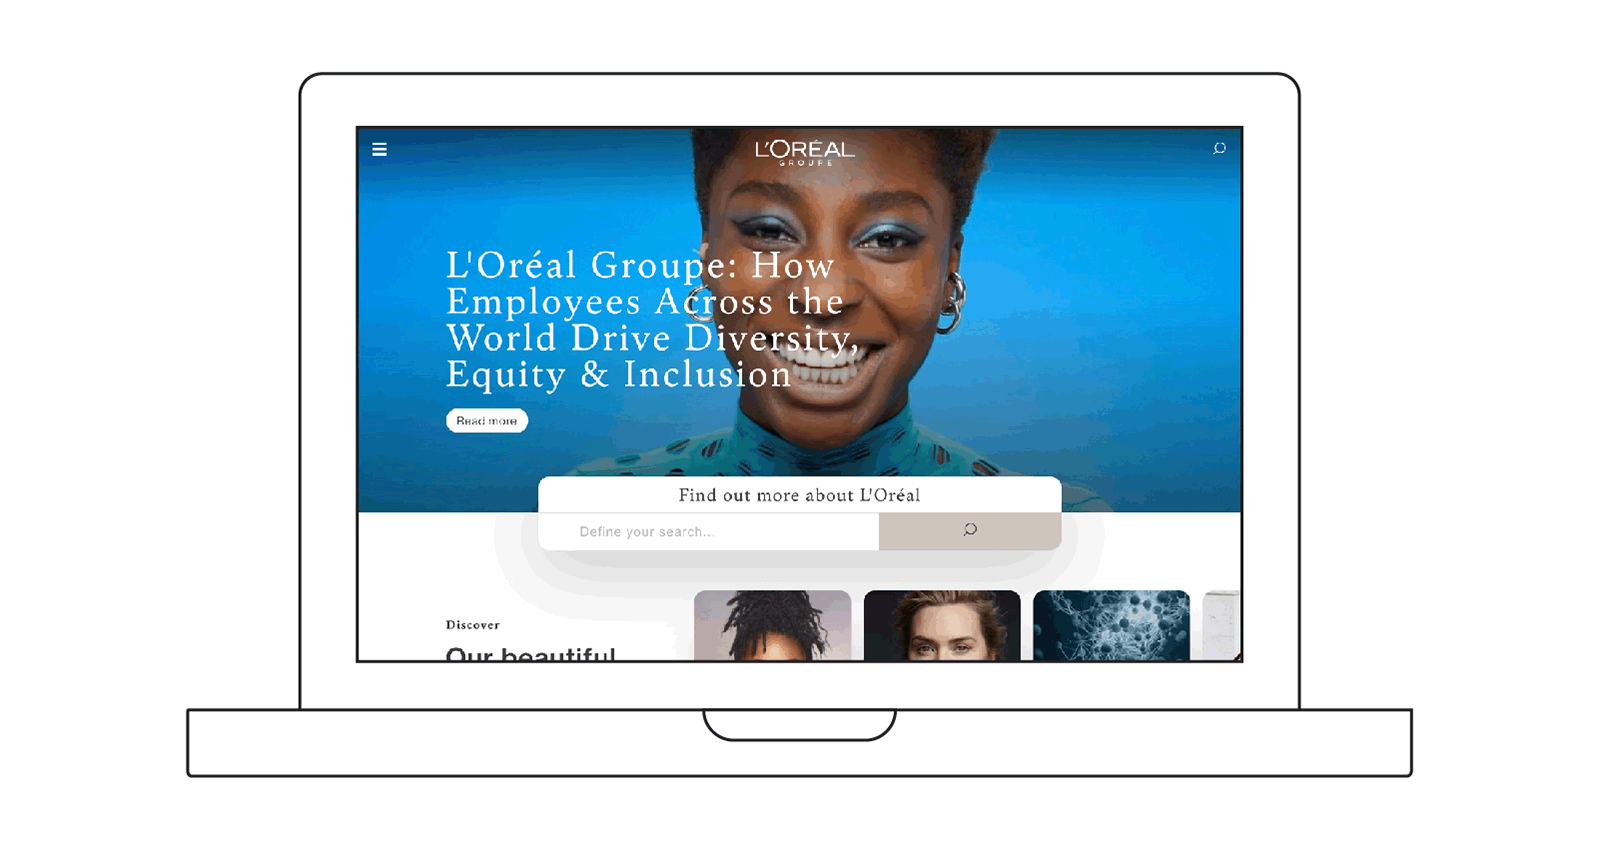 An animated gif shows the homepage of the L'Oréal website. The image rotates between the standard view and high-contrast mode, which shows the site is a strong white-on-black-contrast and with no images behind the text.